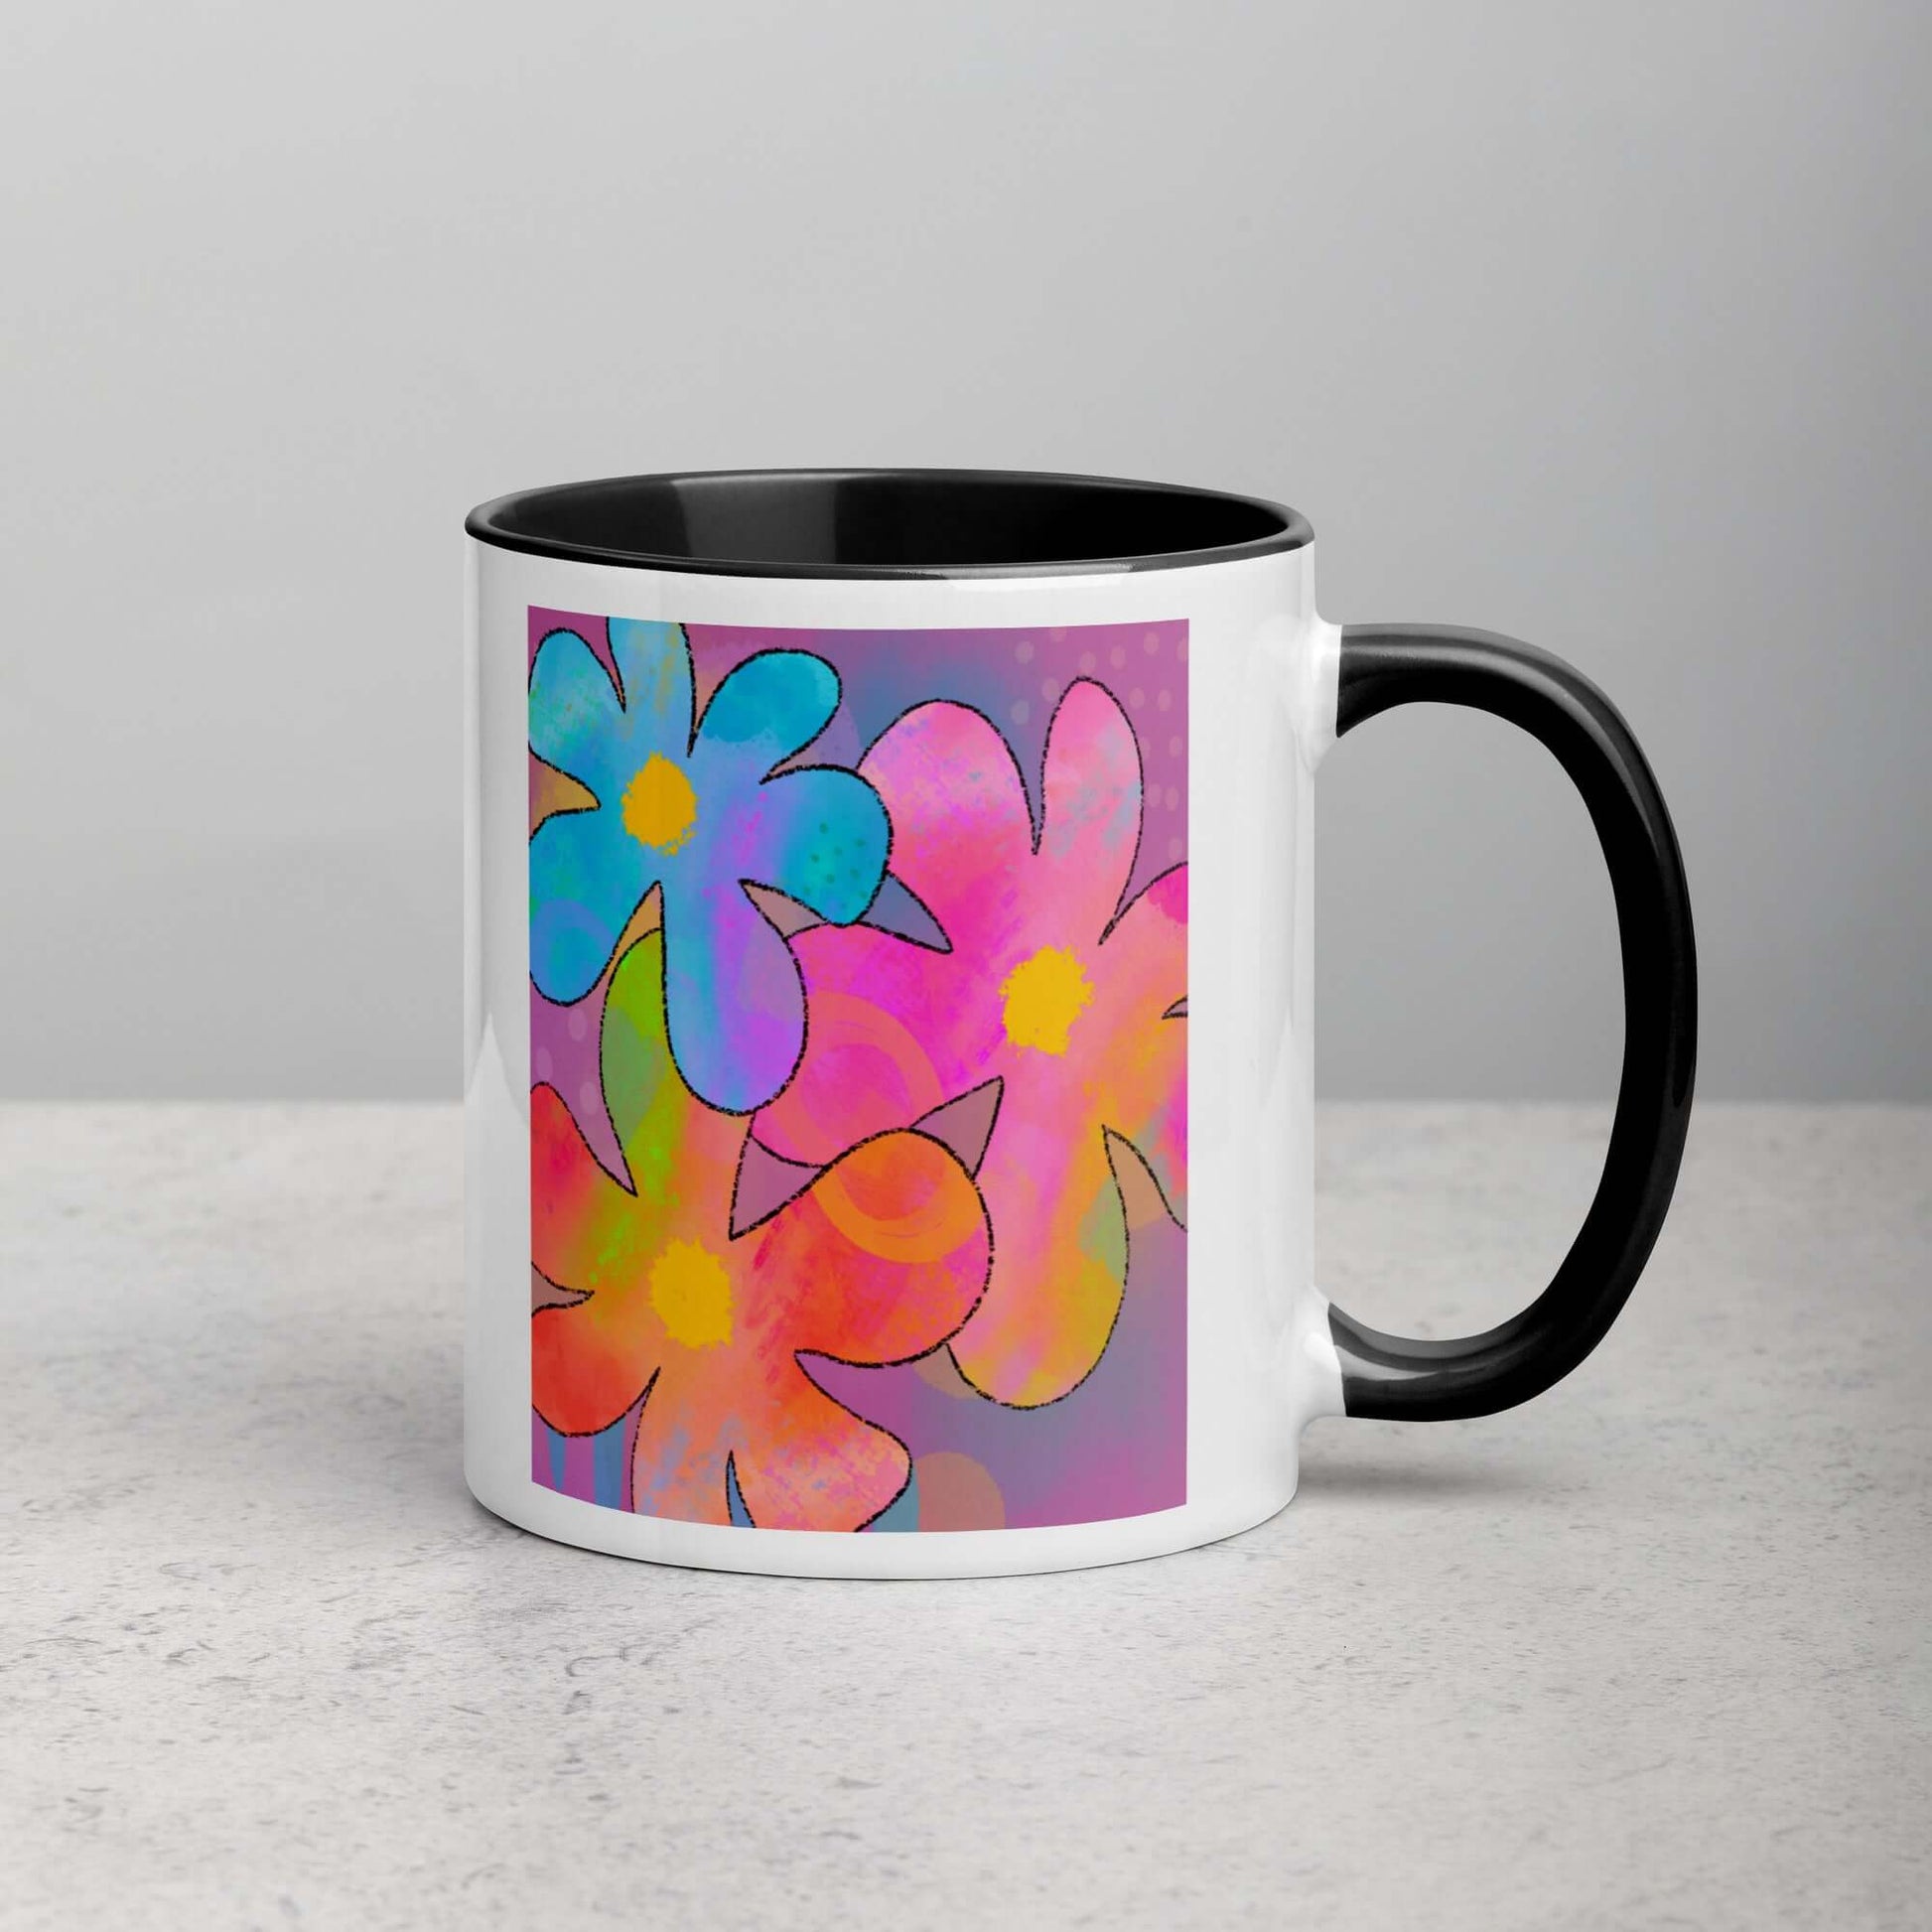 Big Colorful 1960s Psychedelic “Hippie Flowers” Mug with Black Color Inside Right Handed Front View